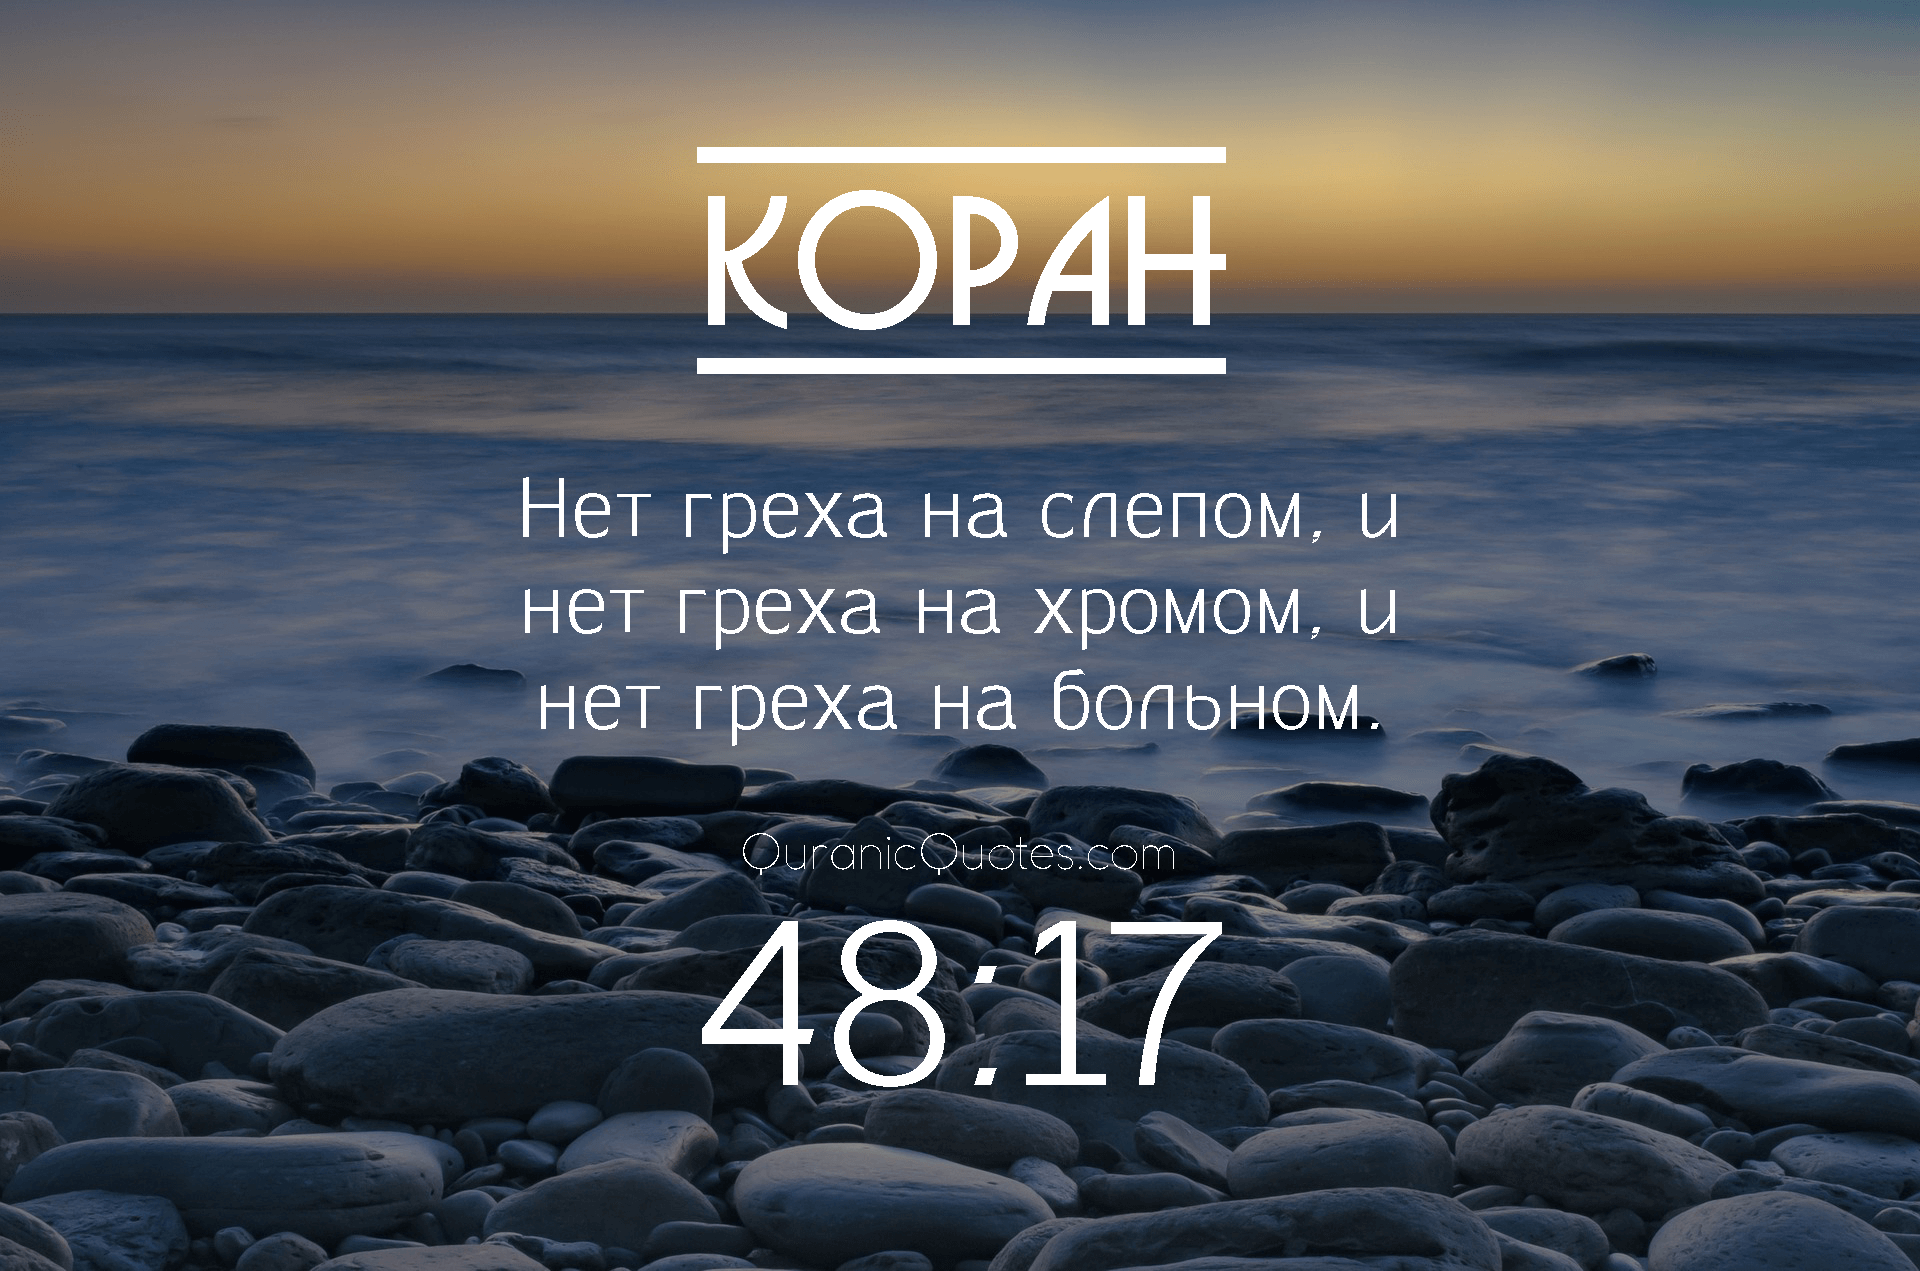 Quranic Quotes in Russian #53